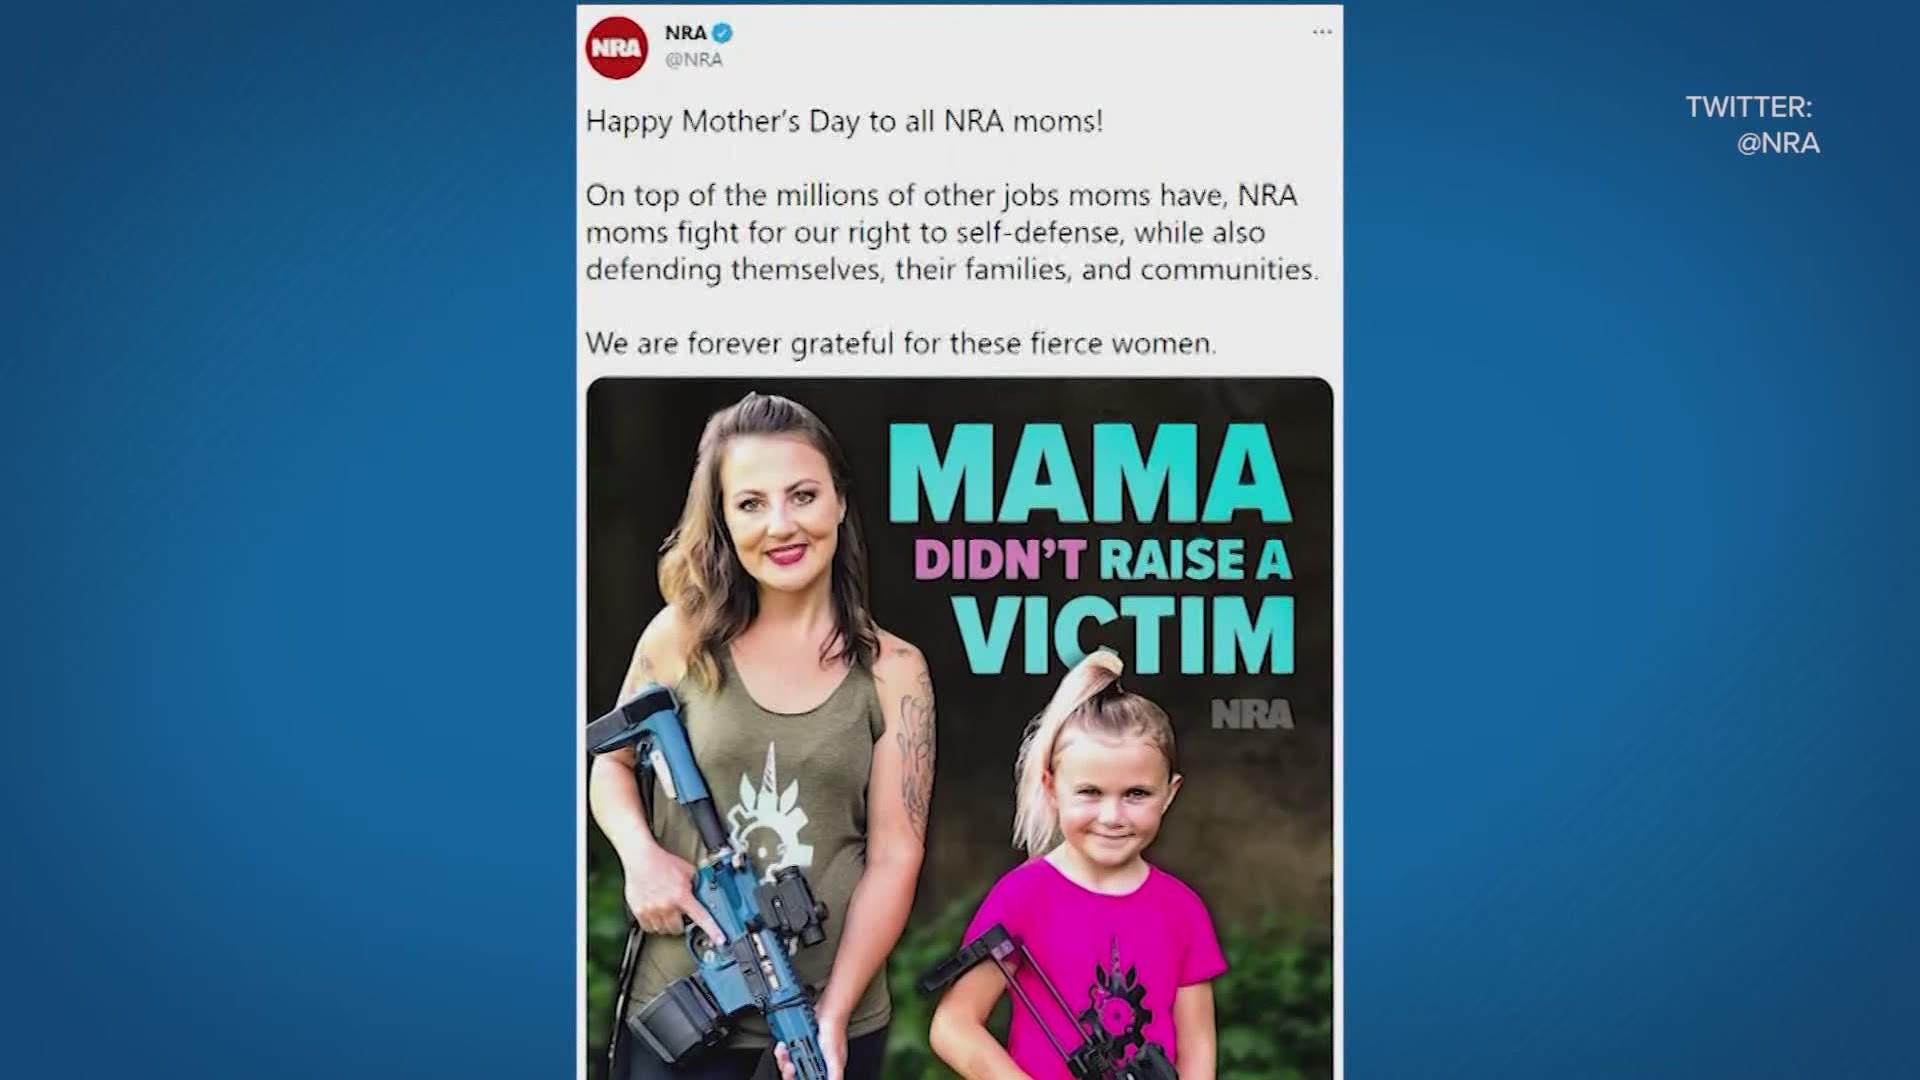 An NRA tweet on Mother’s Day set off a firestorm on Twitter. It featured a woman and young girl, each holding guns, with the title "Mama Didn’t Raise a victim."